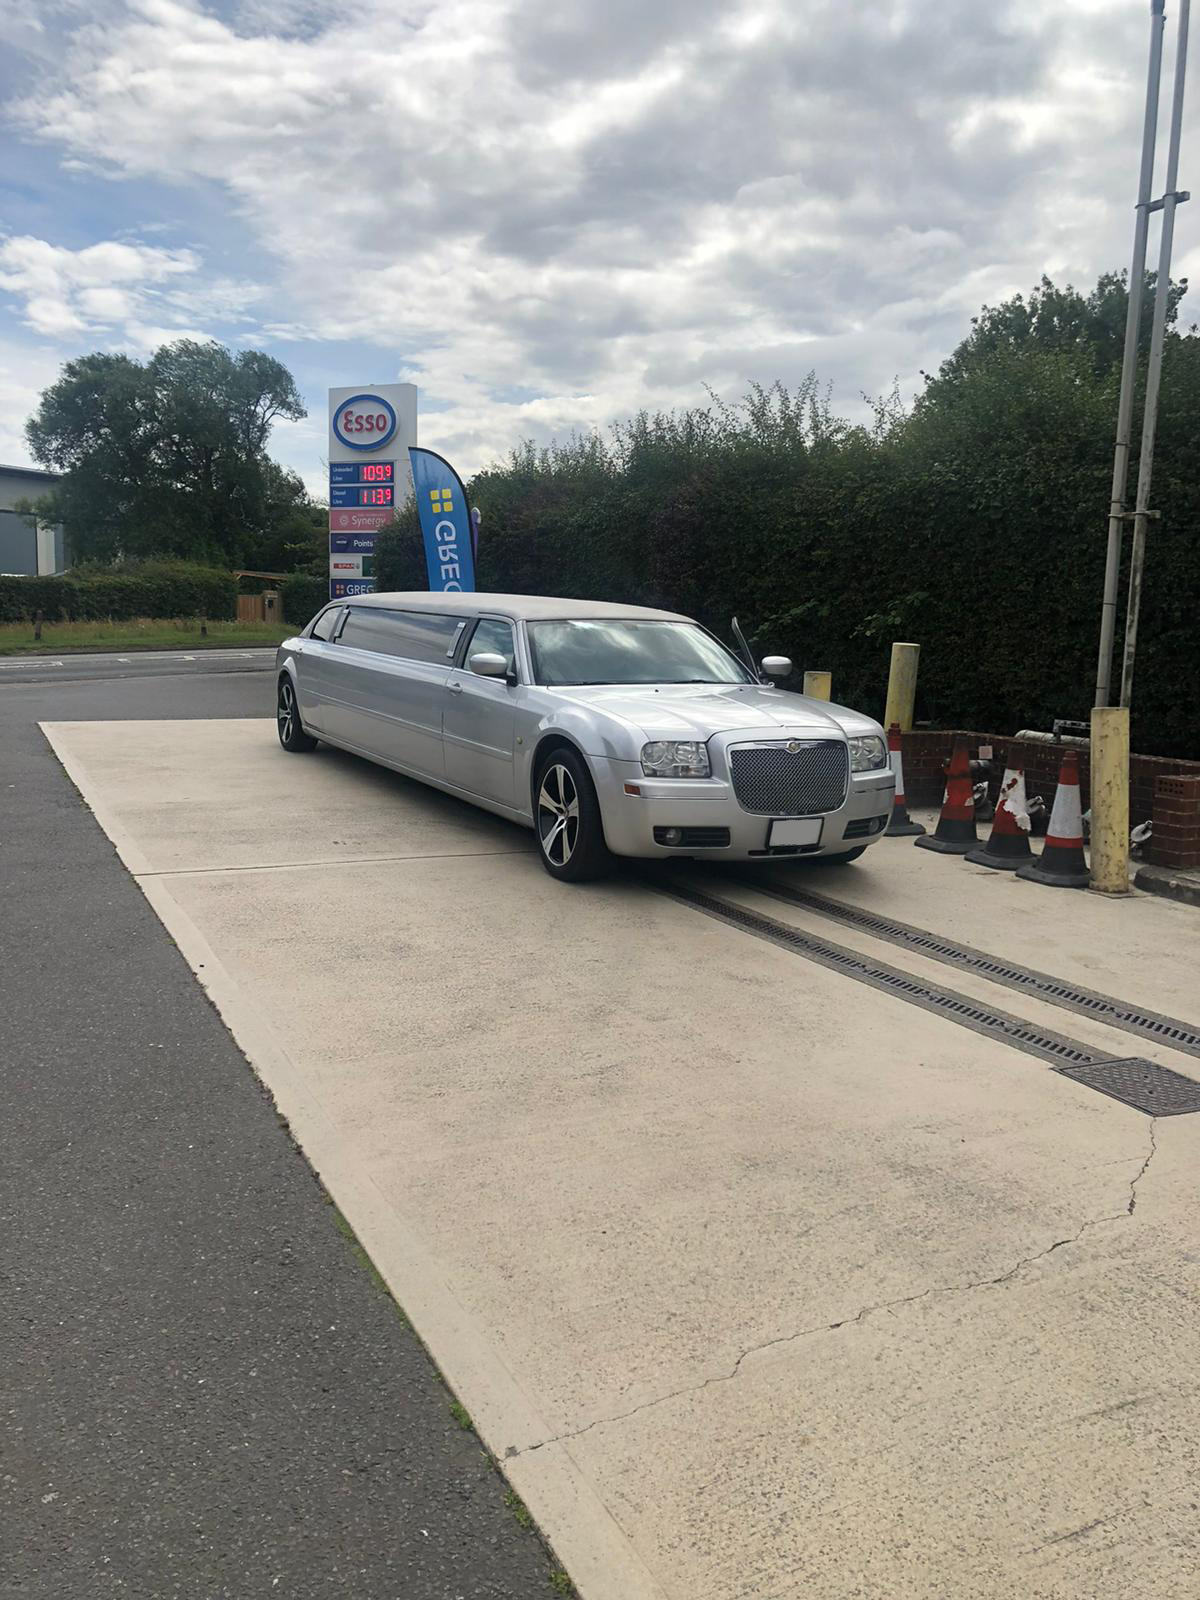 Bentley Limo Hire in London